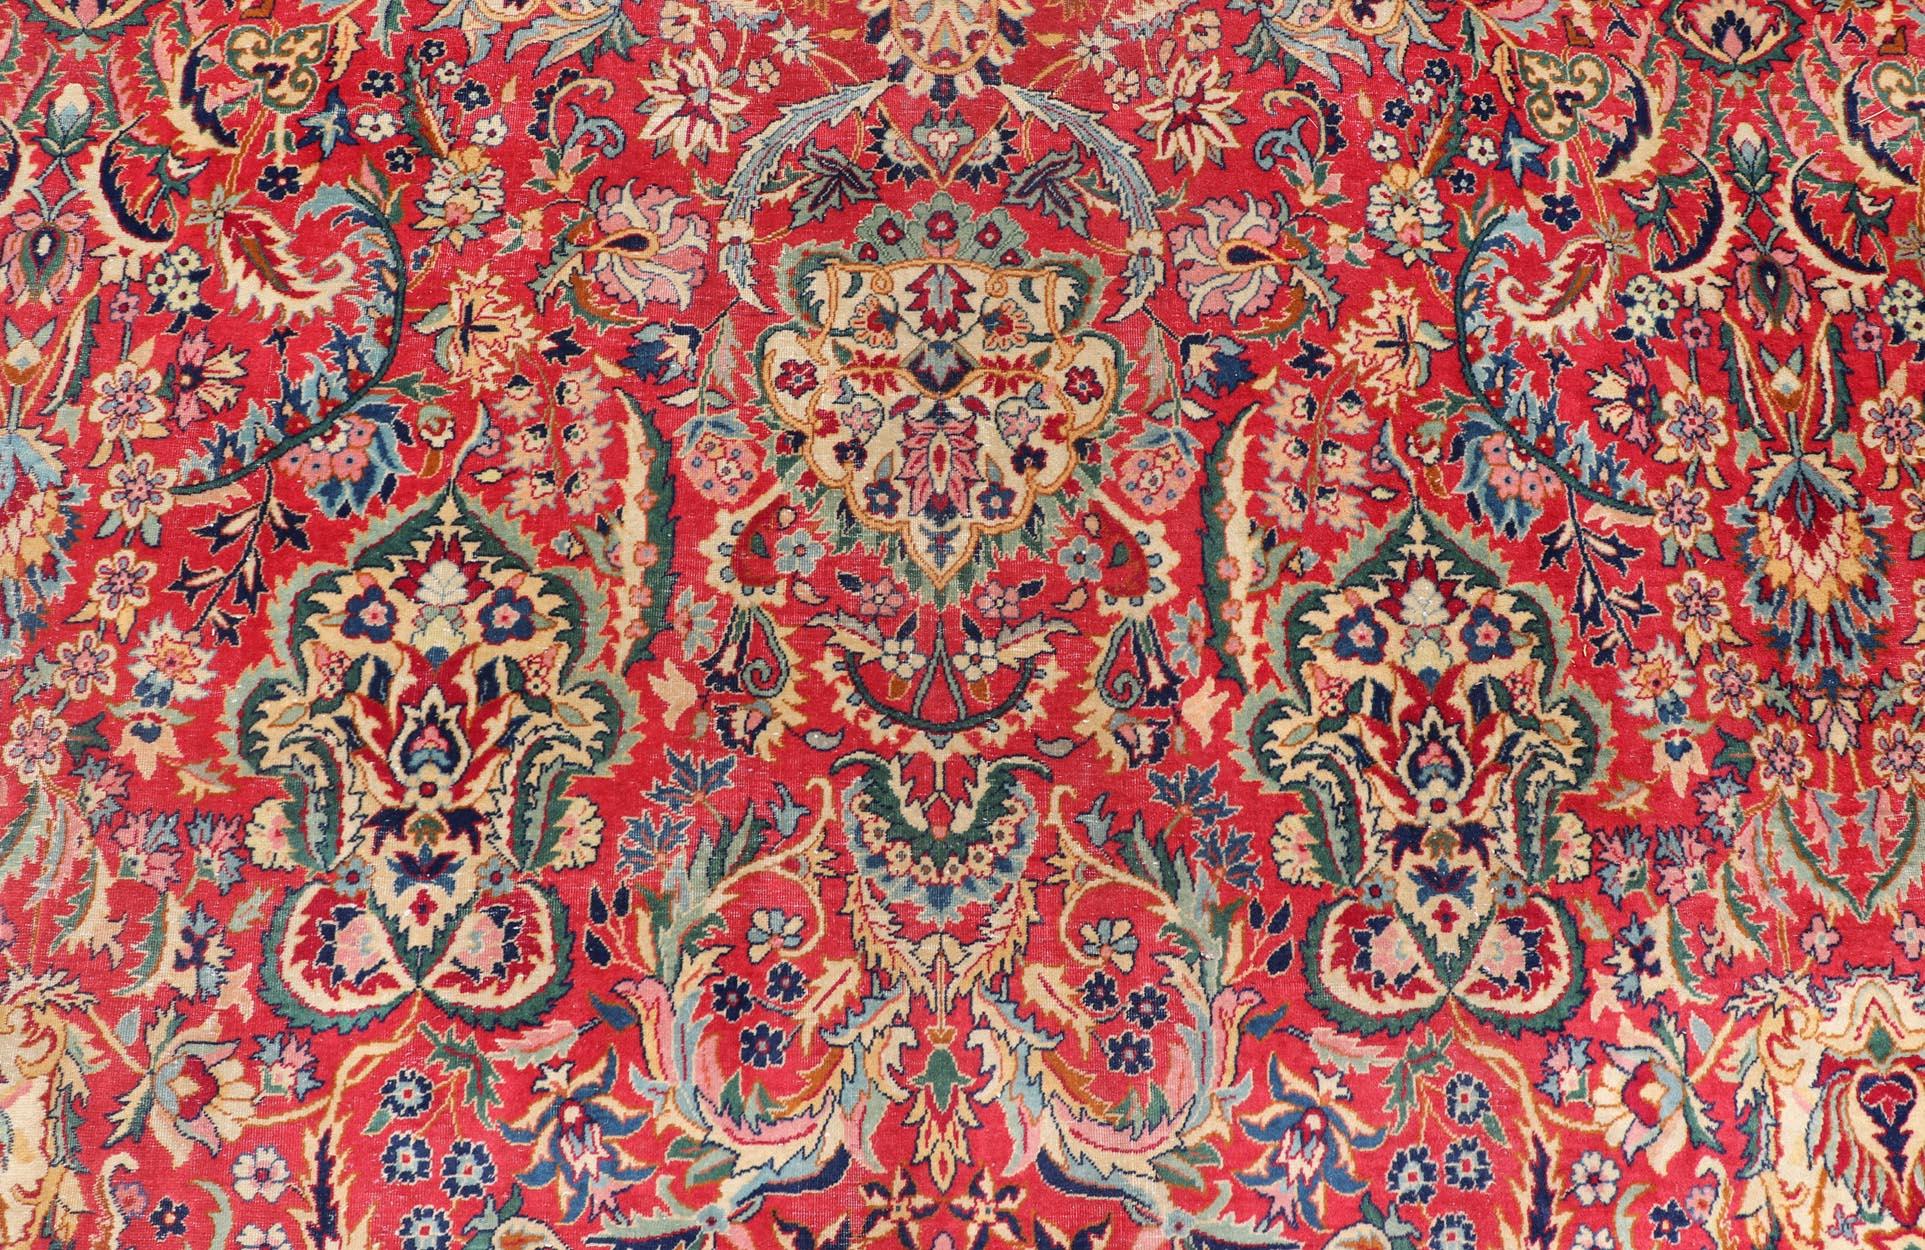 Large Tabriz Vintage Rug in All-Over Floral Design On A Red Field with Multi Colors. Keivan Woven Arts / rug X23-0611-443, country of origin / type: Iran / Tabriz, circa 1940. 

Measures: 12'8 x 19'1 

This large and charming Tabriz  has a classic 